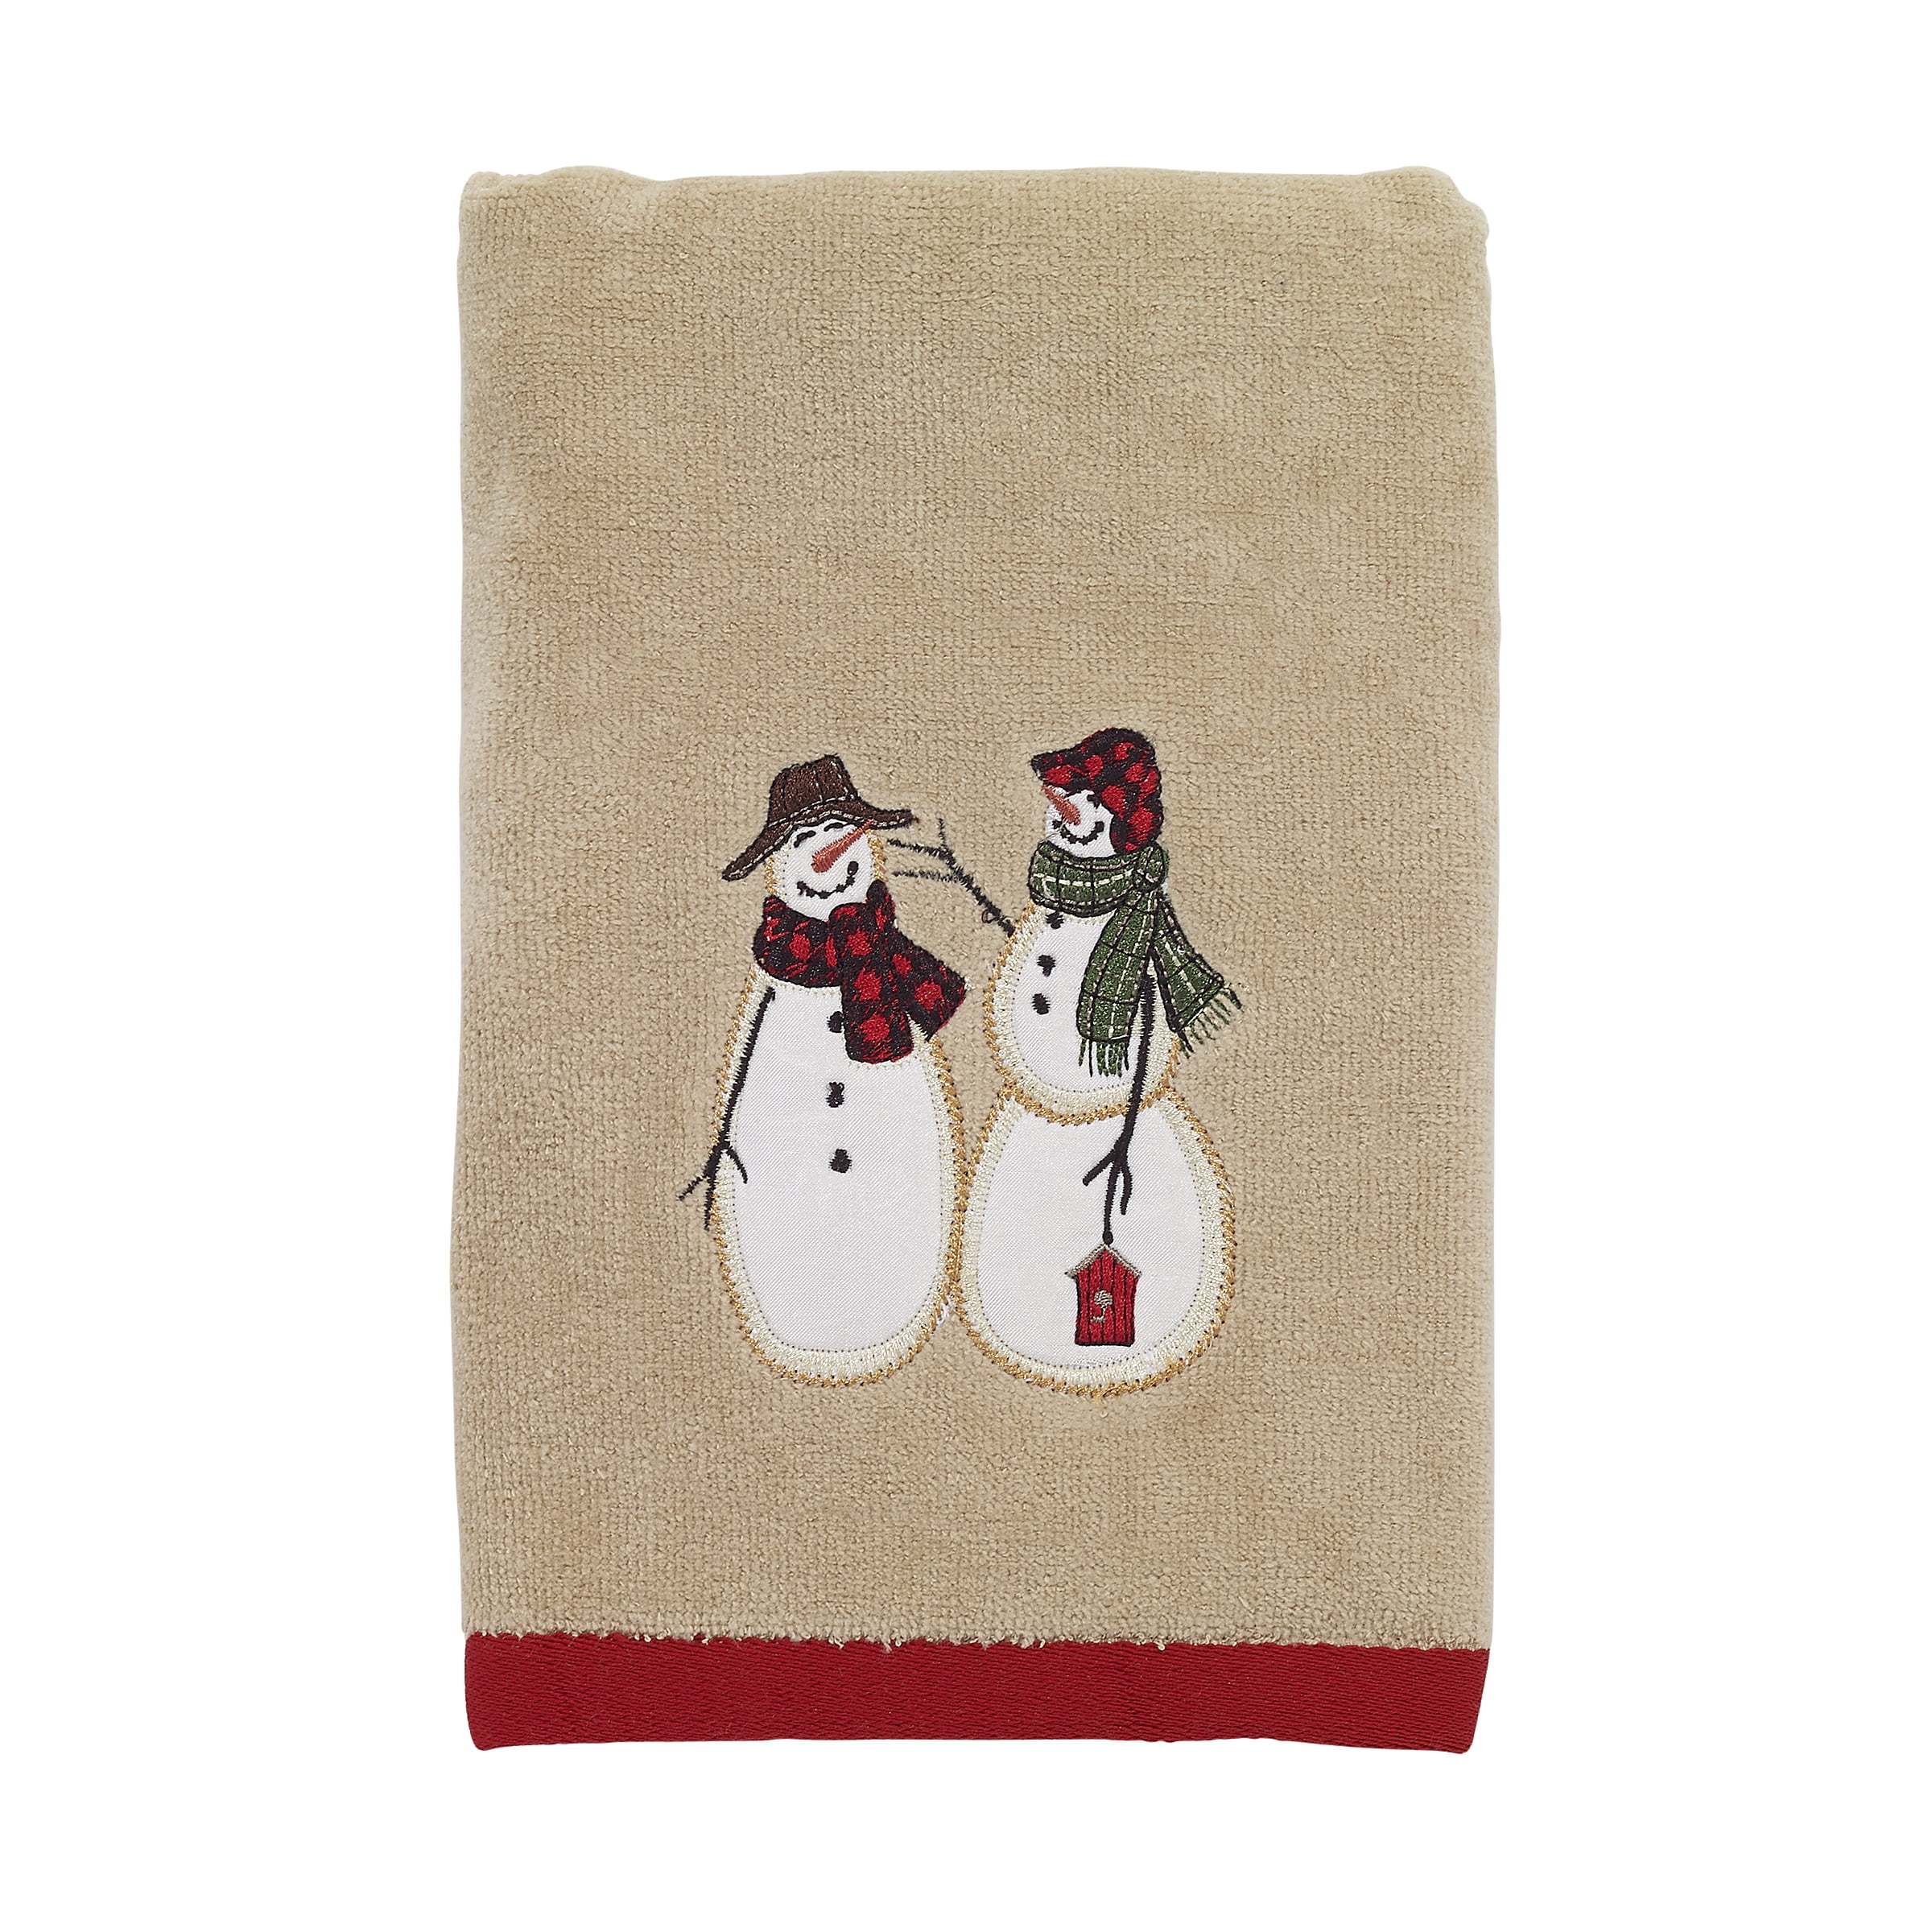 100% Cotton Embroidered Snowman Absorbent Children Hand Face Towel Xmas Gift 